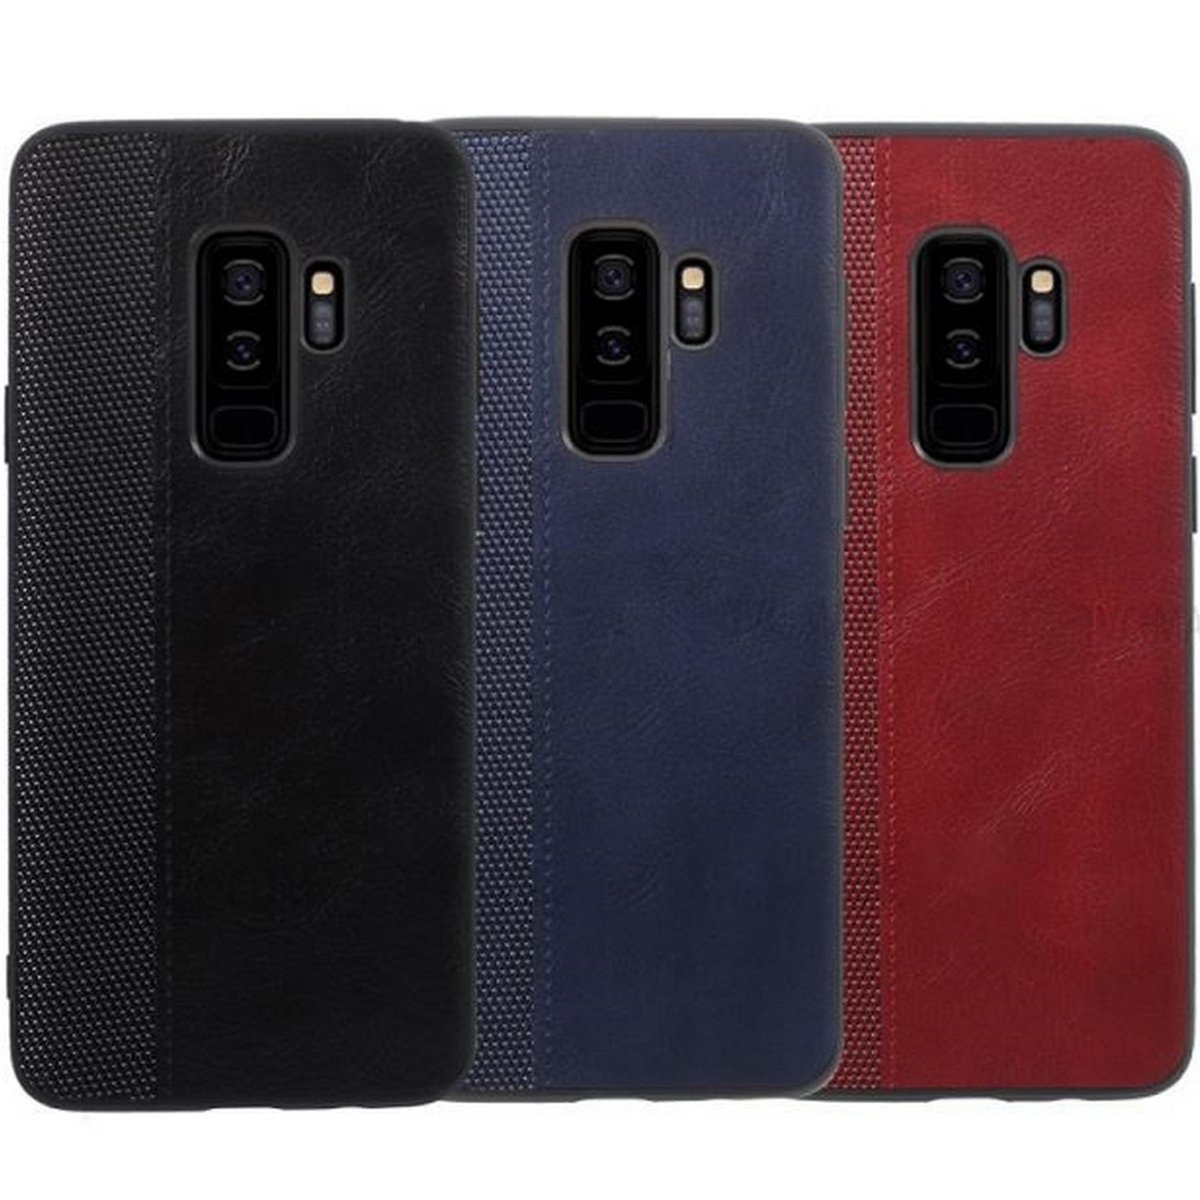 Trands Galaxy S9 Professional Leather Back Case TR-CC9226  Assorted Color 1pc